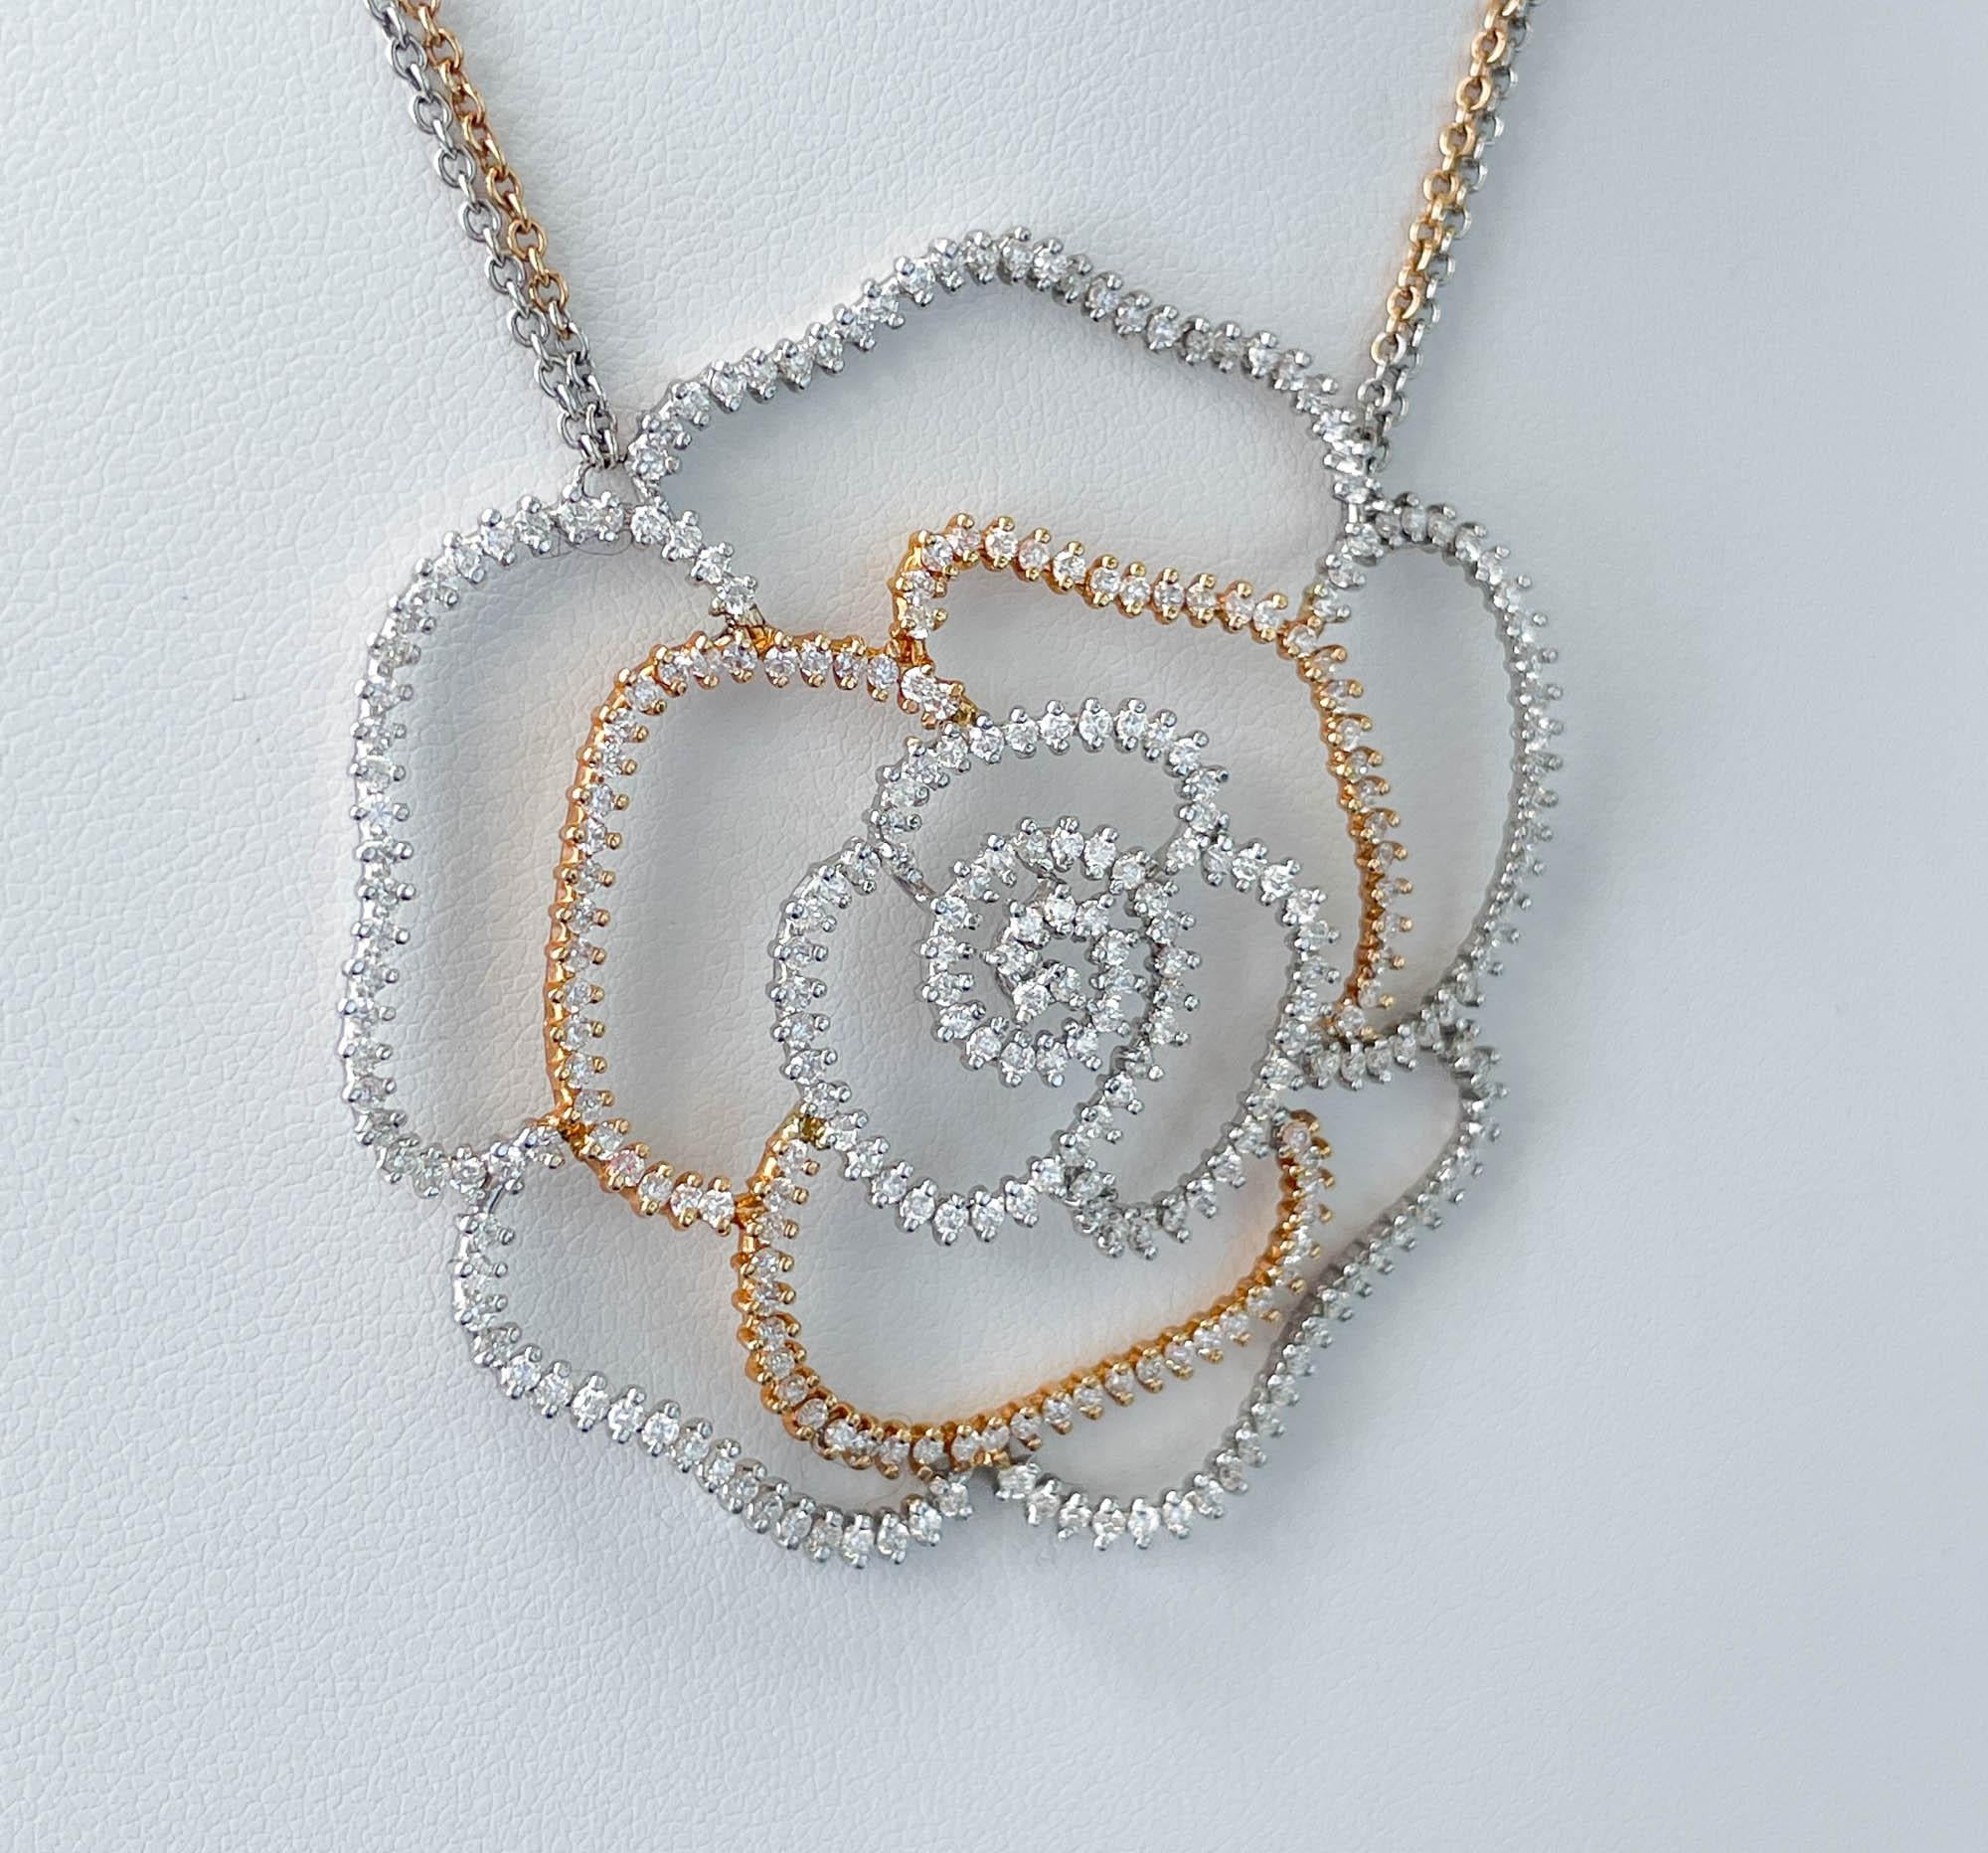 Jay Feder 18k Two Tone Gold Diamond Open Flower Necklace
There are 288 round shaped diamonds; estimated total weight is 3.85 carats.
The necklace is 16.5 inches long plus pendant drop is 2.25 inches.
The pendant’s measurements are 2.25x2.25